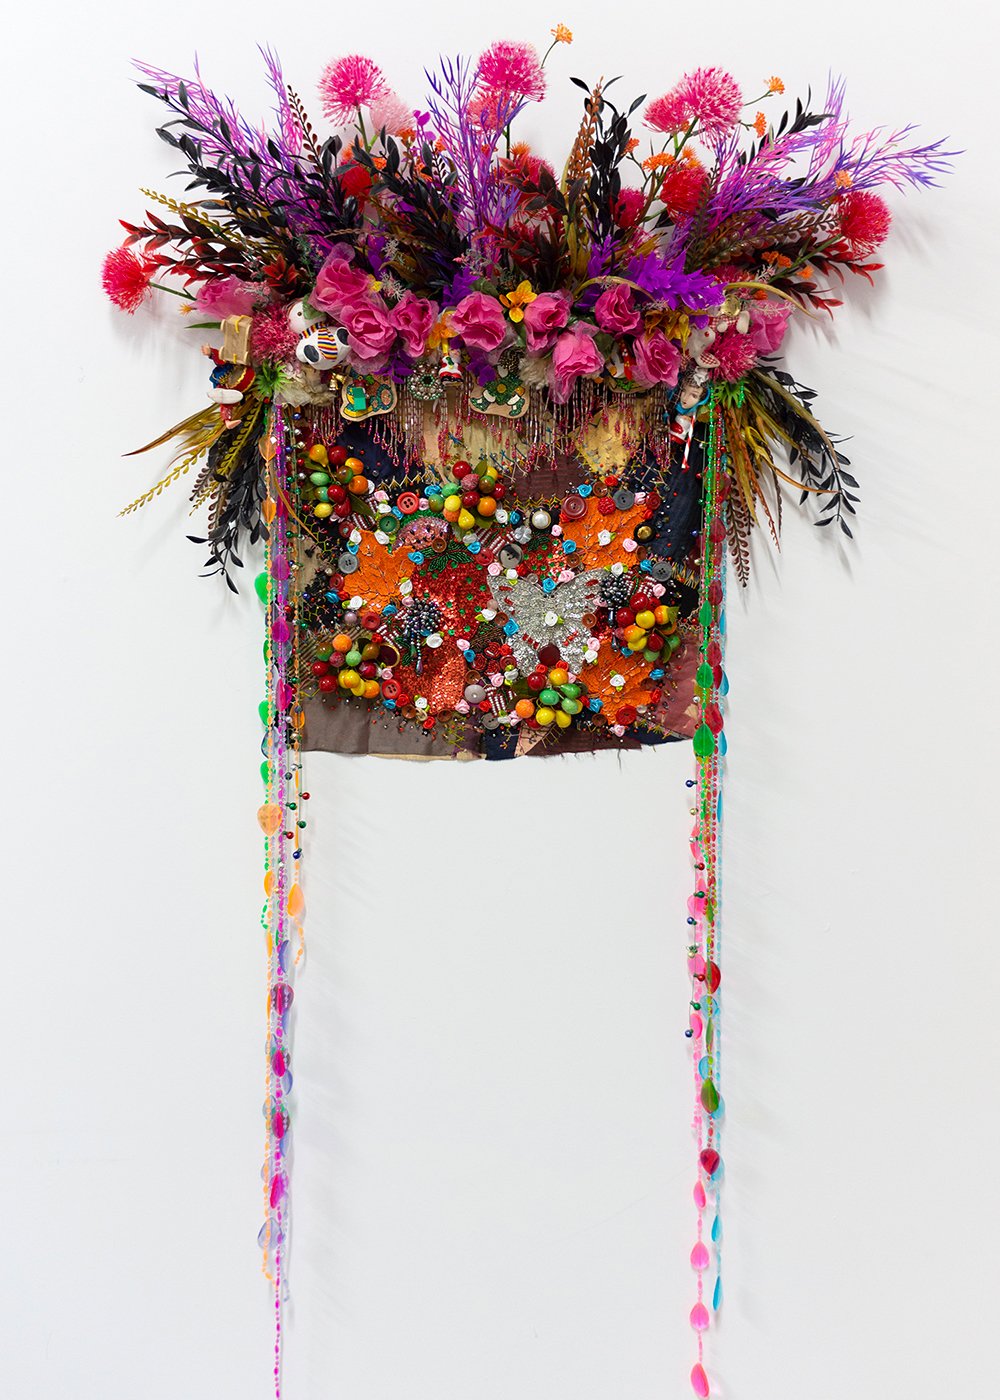   Shroud #12 (study) , 2023, Found 'Crazy' quilt ca. 1900, trim, fabric and plastic flowers and fauna, toys, ornaments, costume jewelry, beads, sequins, buttons, plastic curtain, fabric, pine, 57 x 32 x 9” 